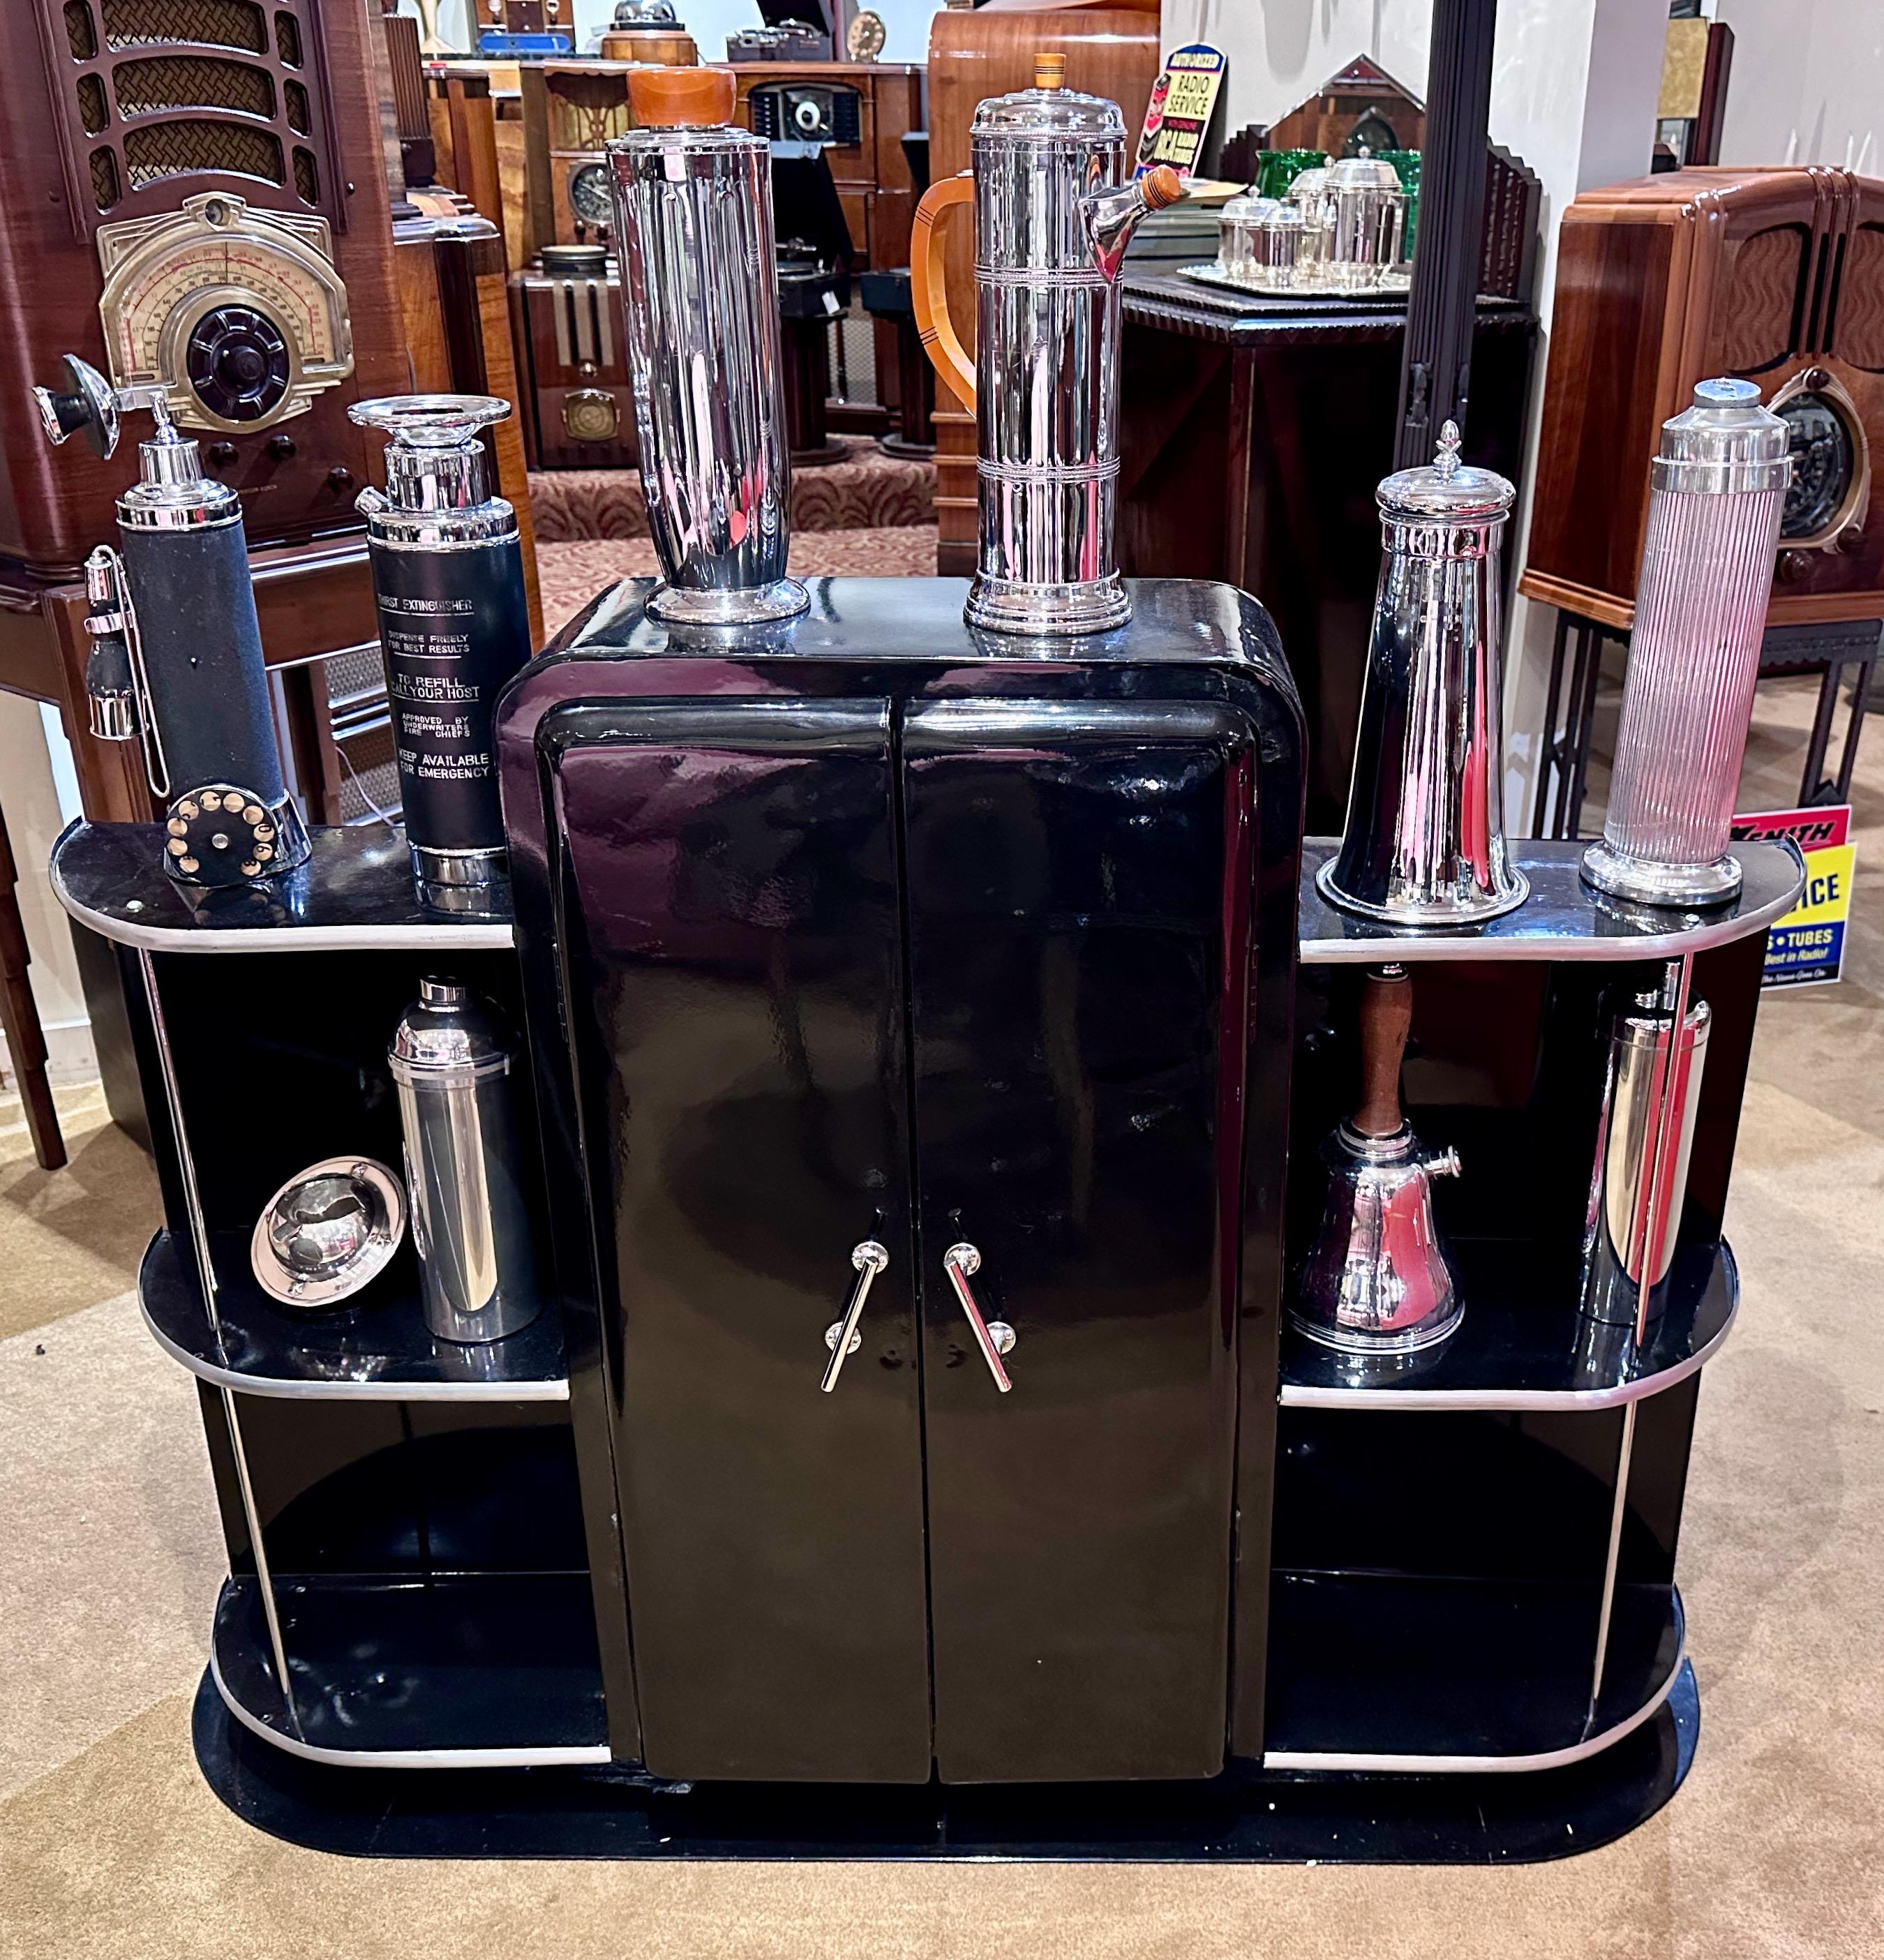 Streamline Art Deco Bar Cabinet  in metal  with chrome details has sleek lines, geometric shapes, and a polished, reflective surface characteristic of Art Deco design. As a bar cabinet, it can store and display barware, liquor bottles, and other